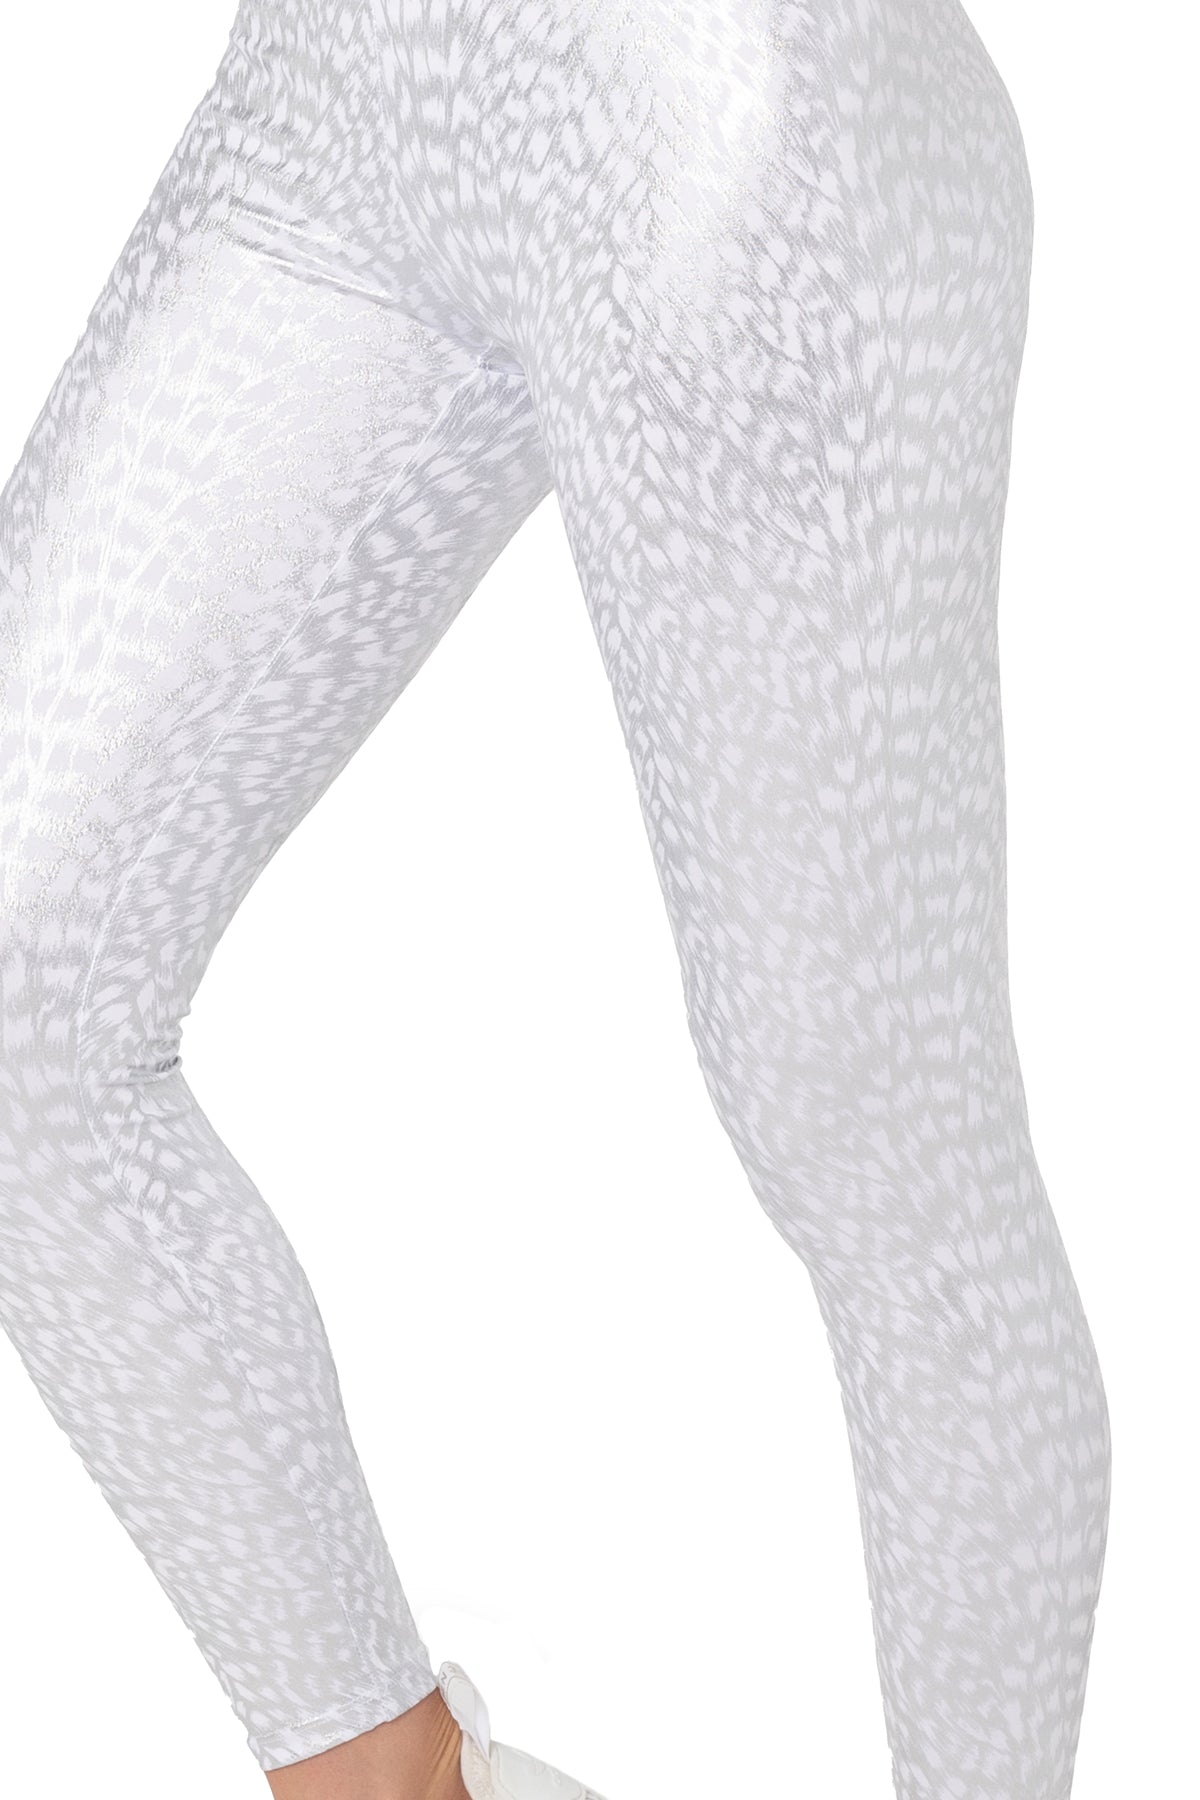 WILD Womens High Waisted Seamless Zebra Leopard Joga Leggings Womens  Fitness Leggings For Gym And Workout Nylon From Dacai1, $15.41